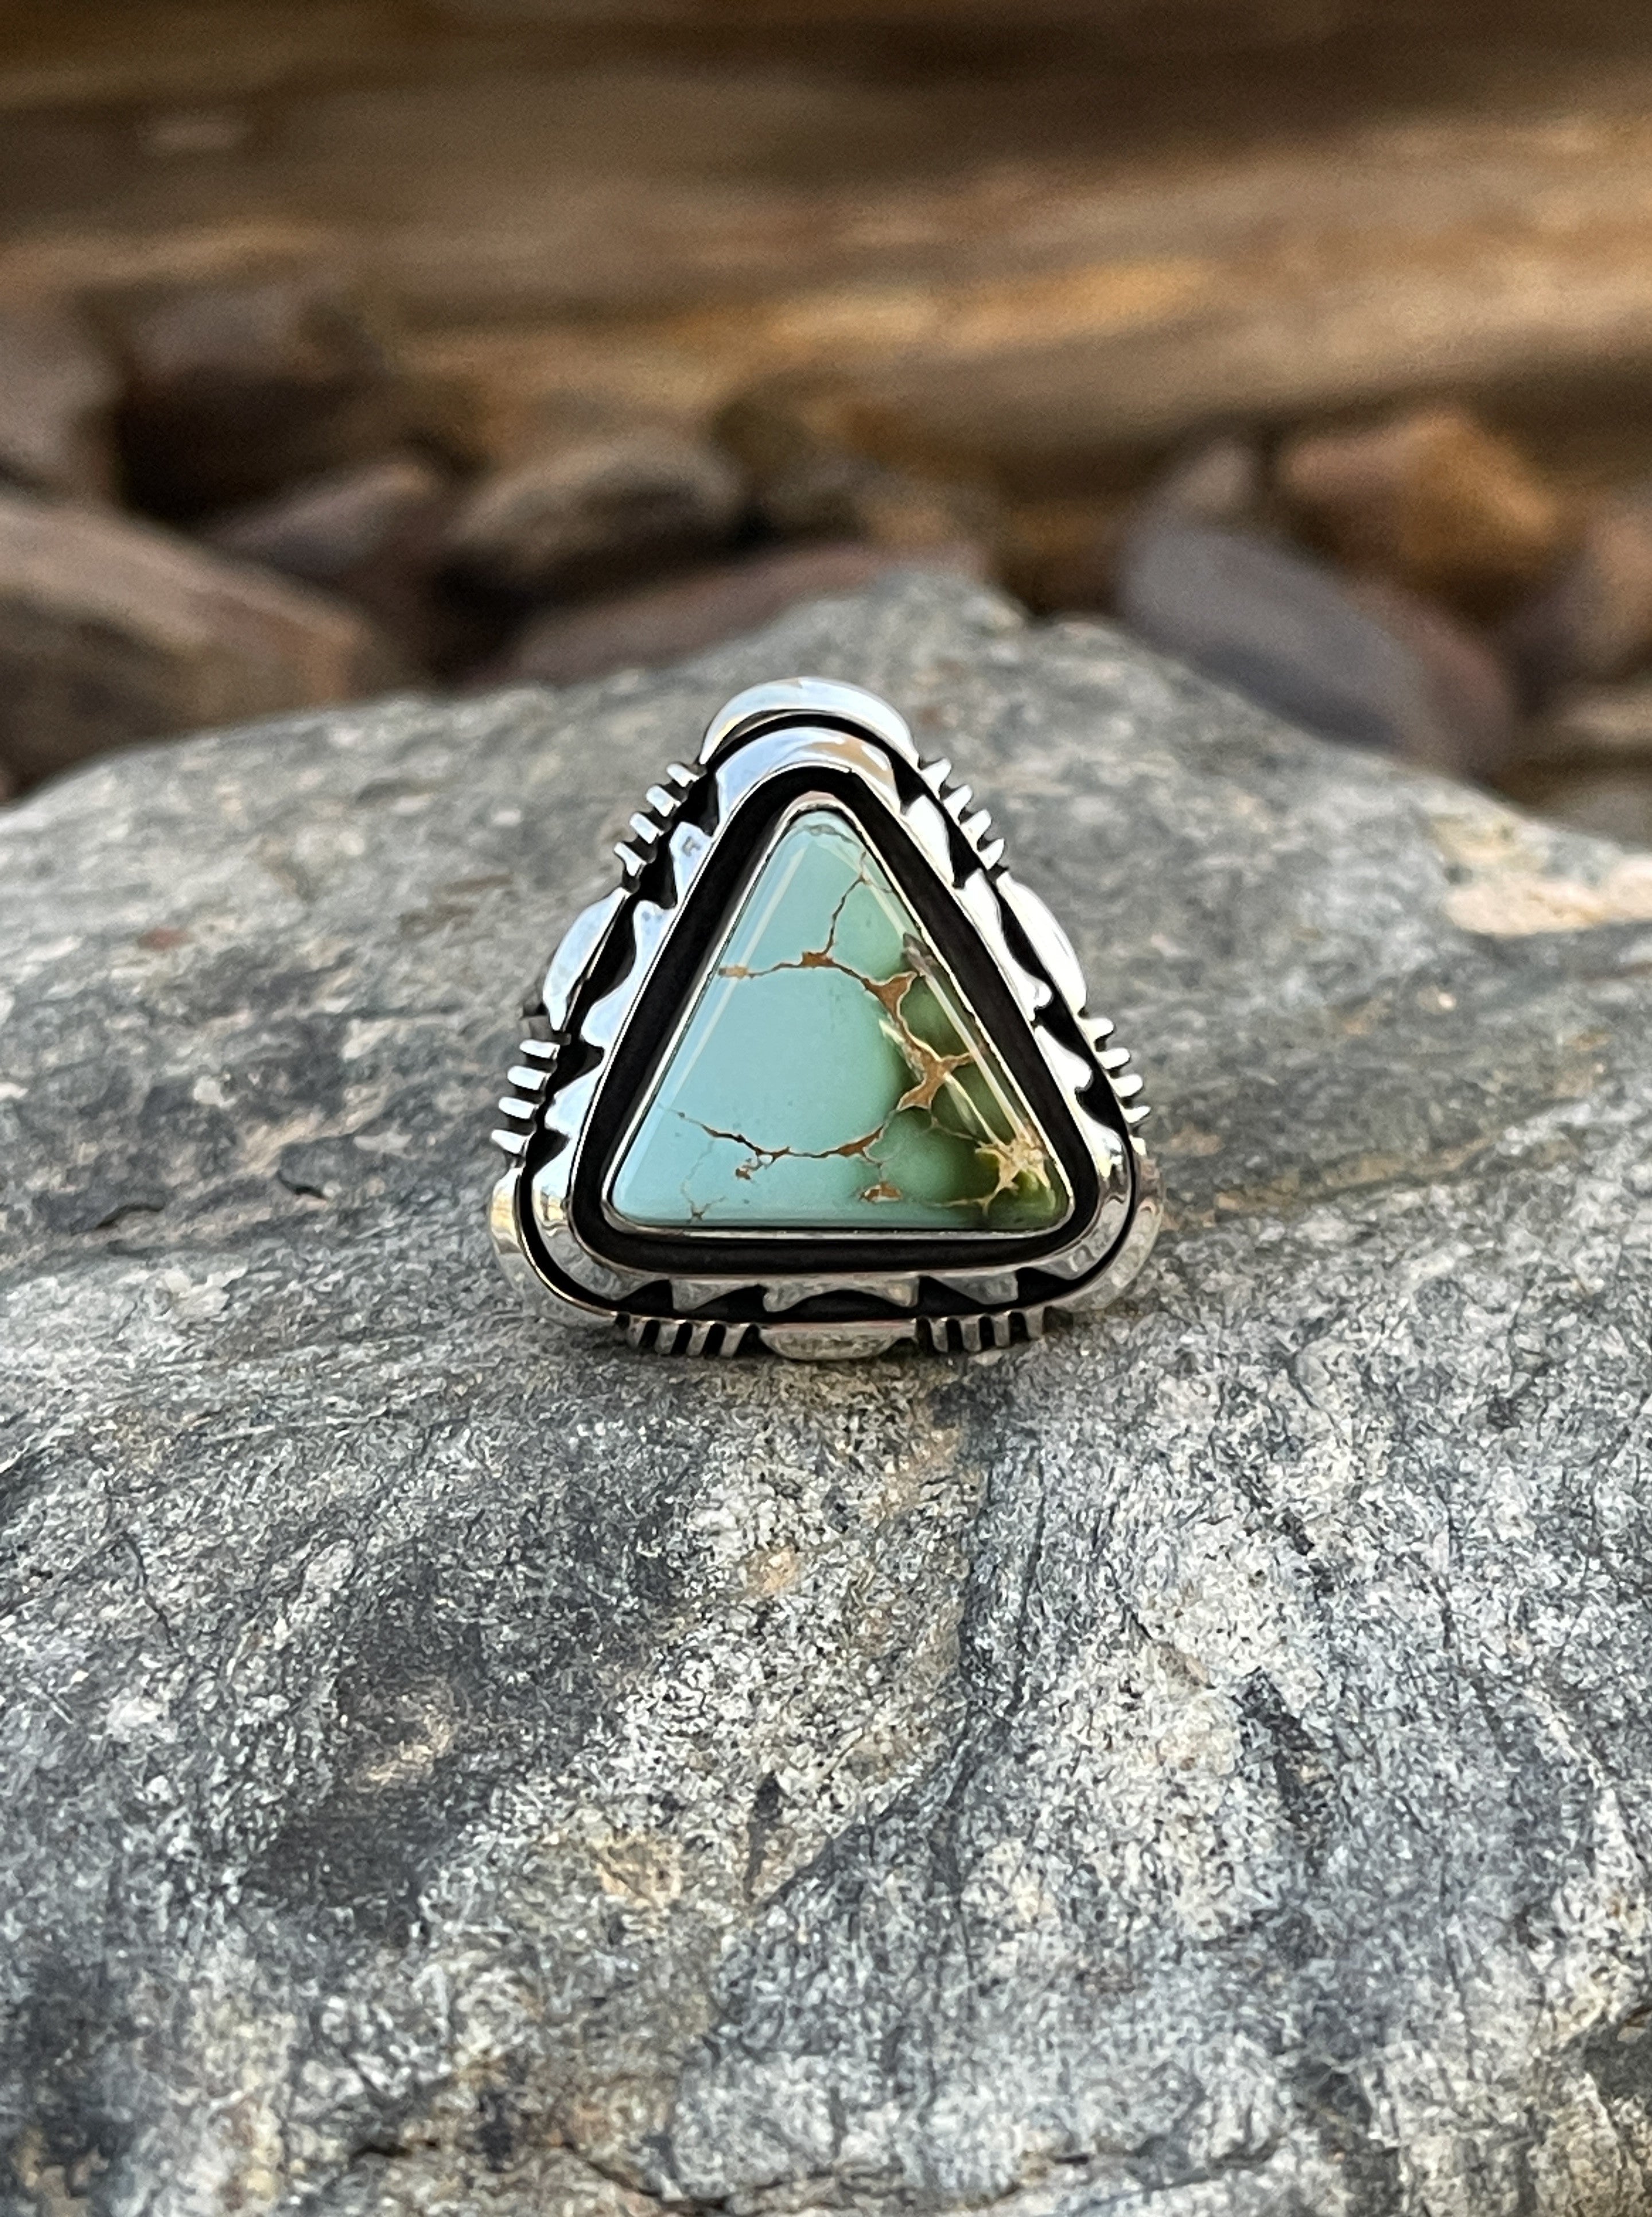 Handmade Solid Sterling Silver Triangle Cut Royston Turquoise Ring - Size 9